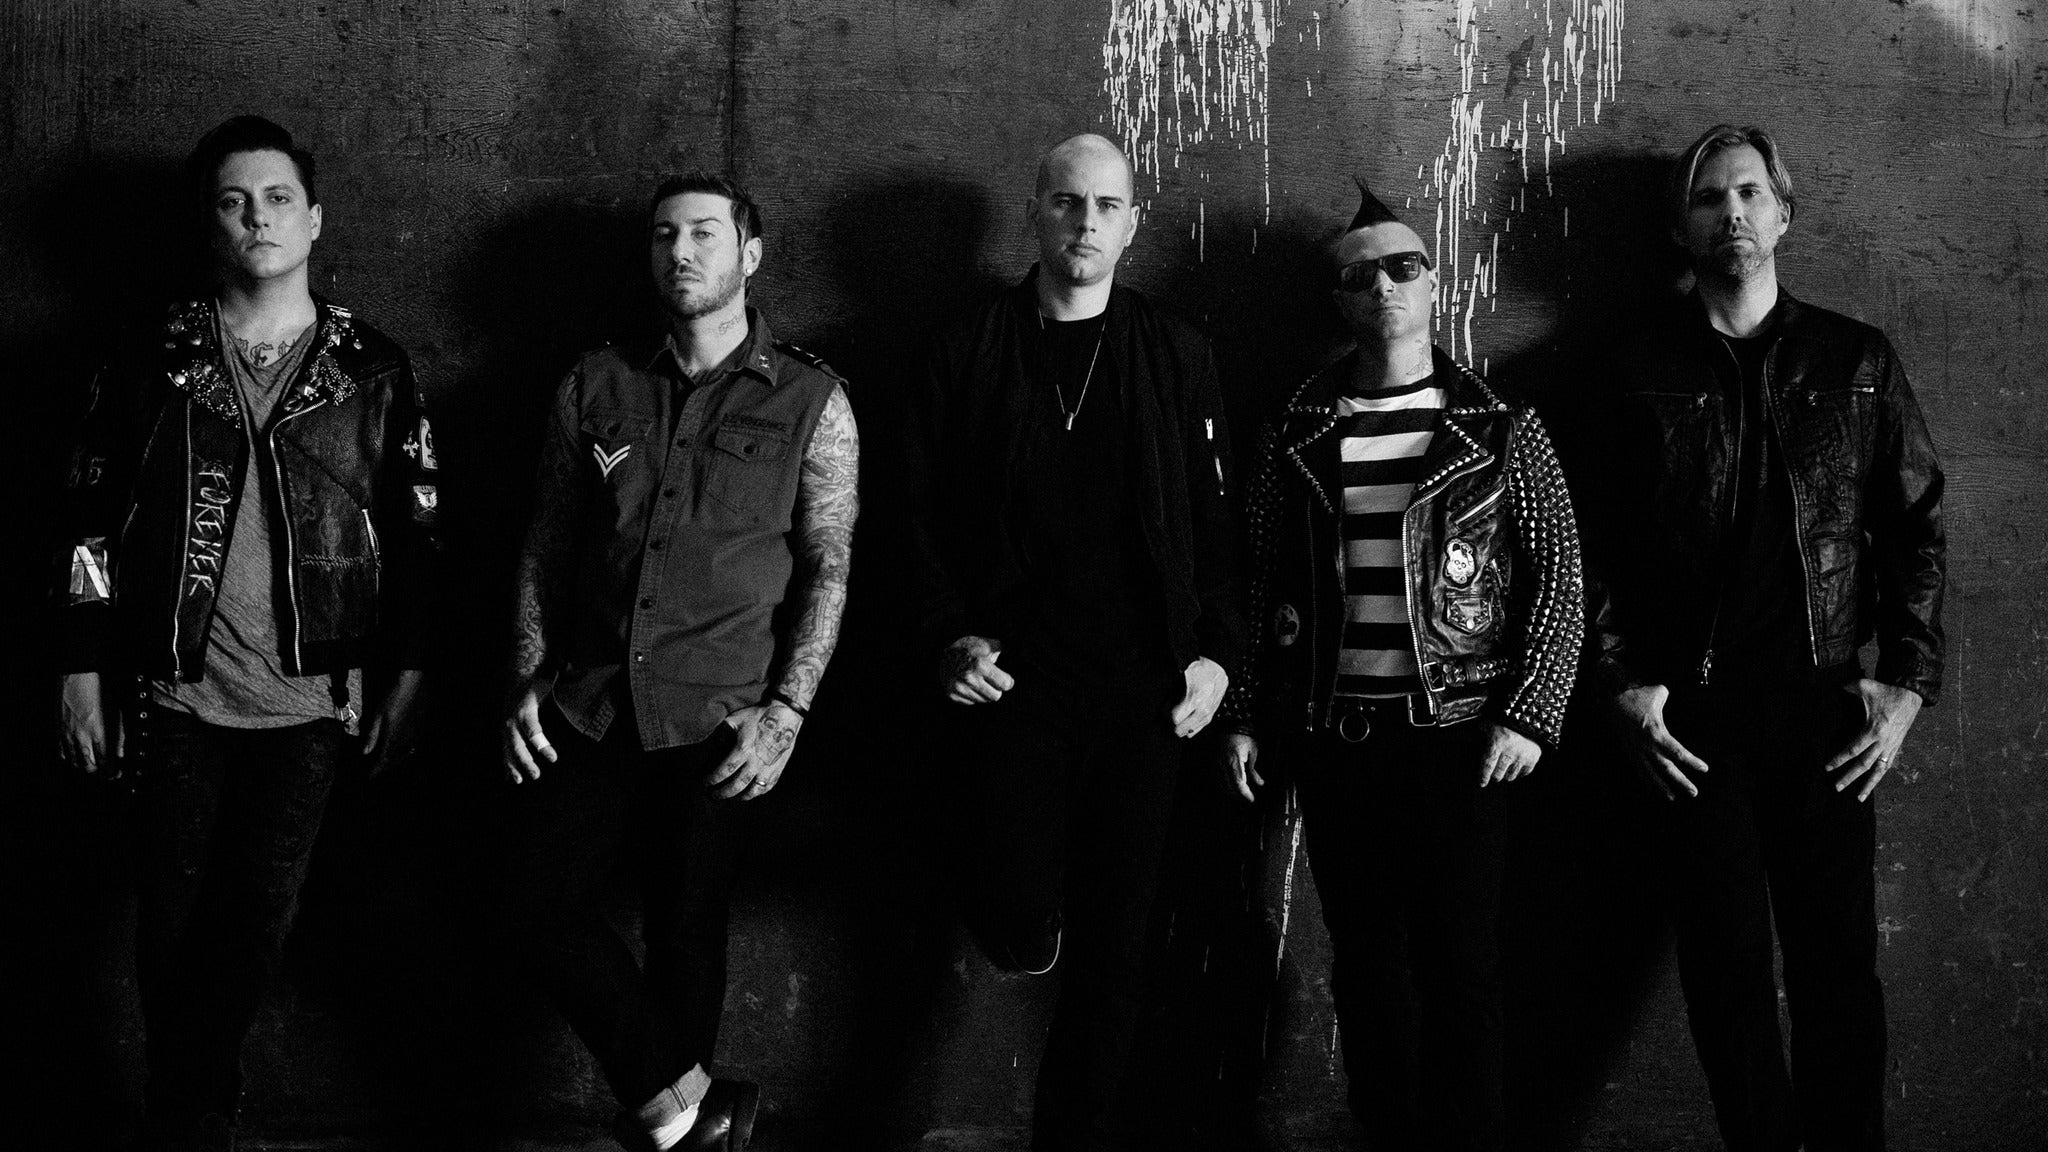 Avenged Sevenfold: North American Tour with Falling in Reverse Tickets